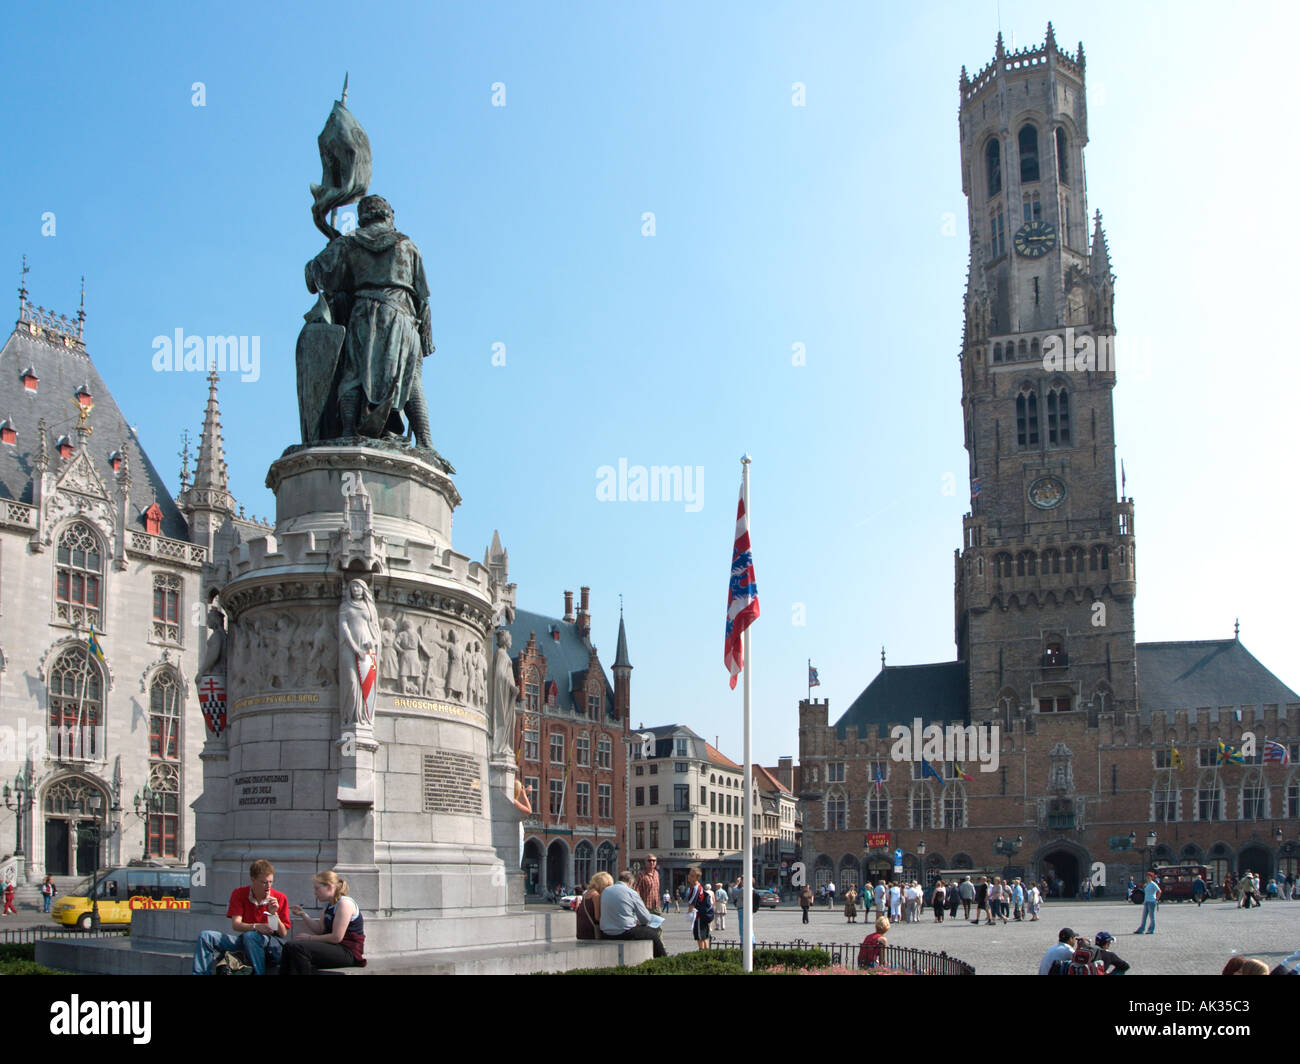 The Belfry and statue in the Markt (Main Square), Bruges (Brugge), Belgium Stock Photo